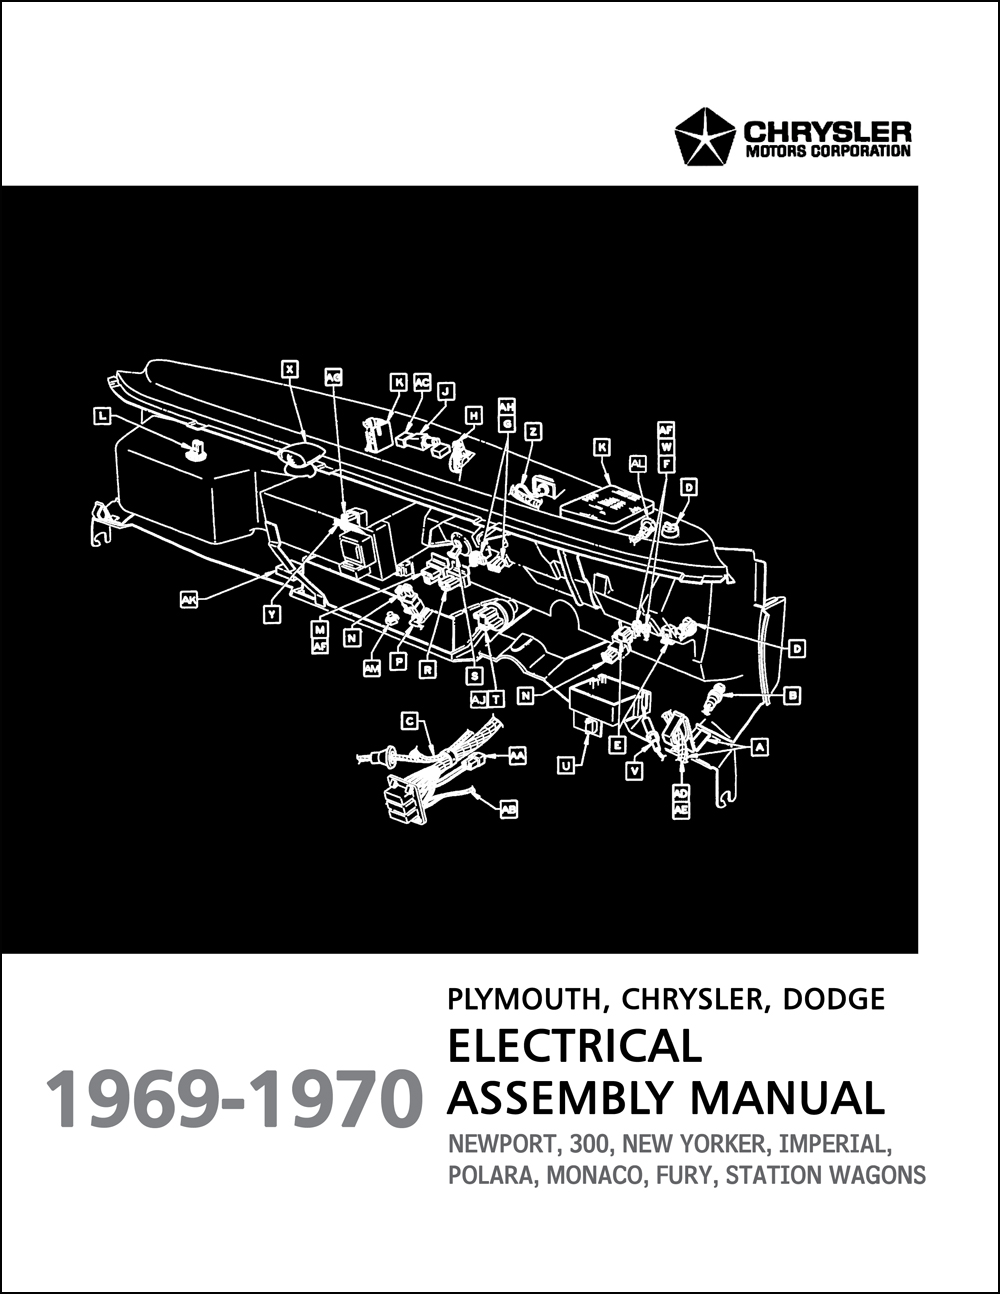 1969-1970 Chrysler, Dodge, Plymouth Electrical Assembly Manual Reprint